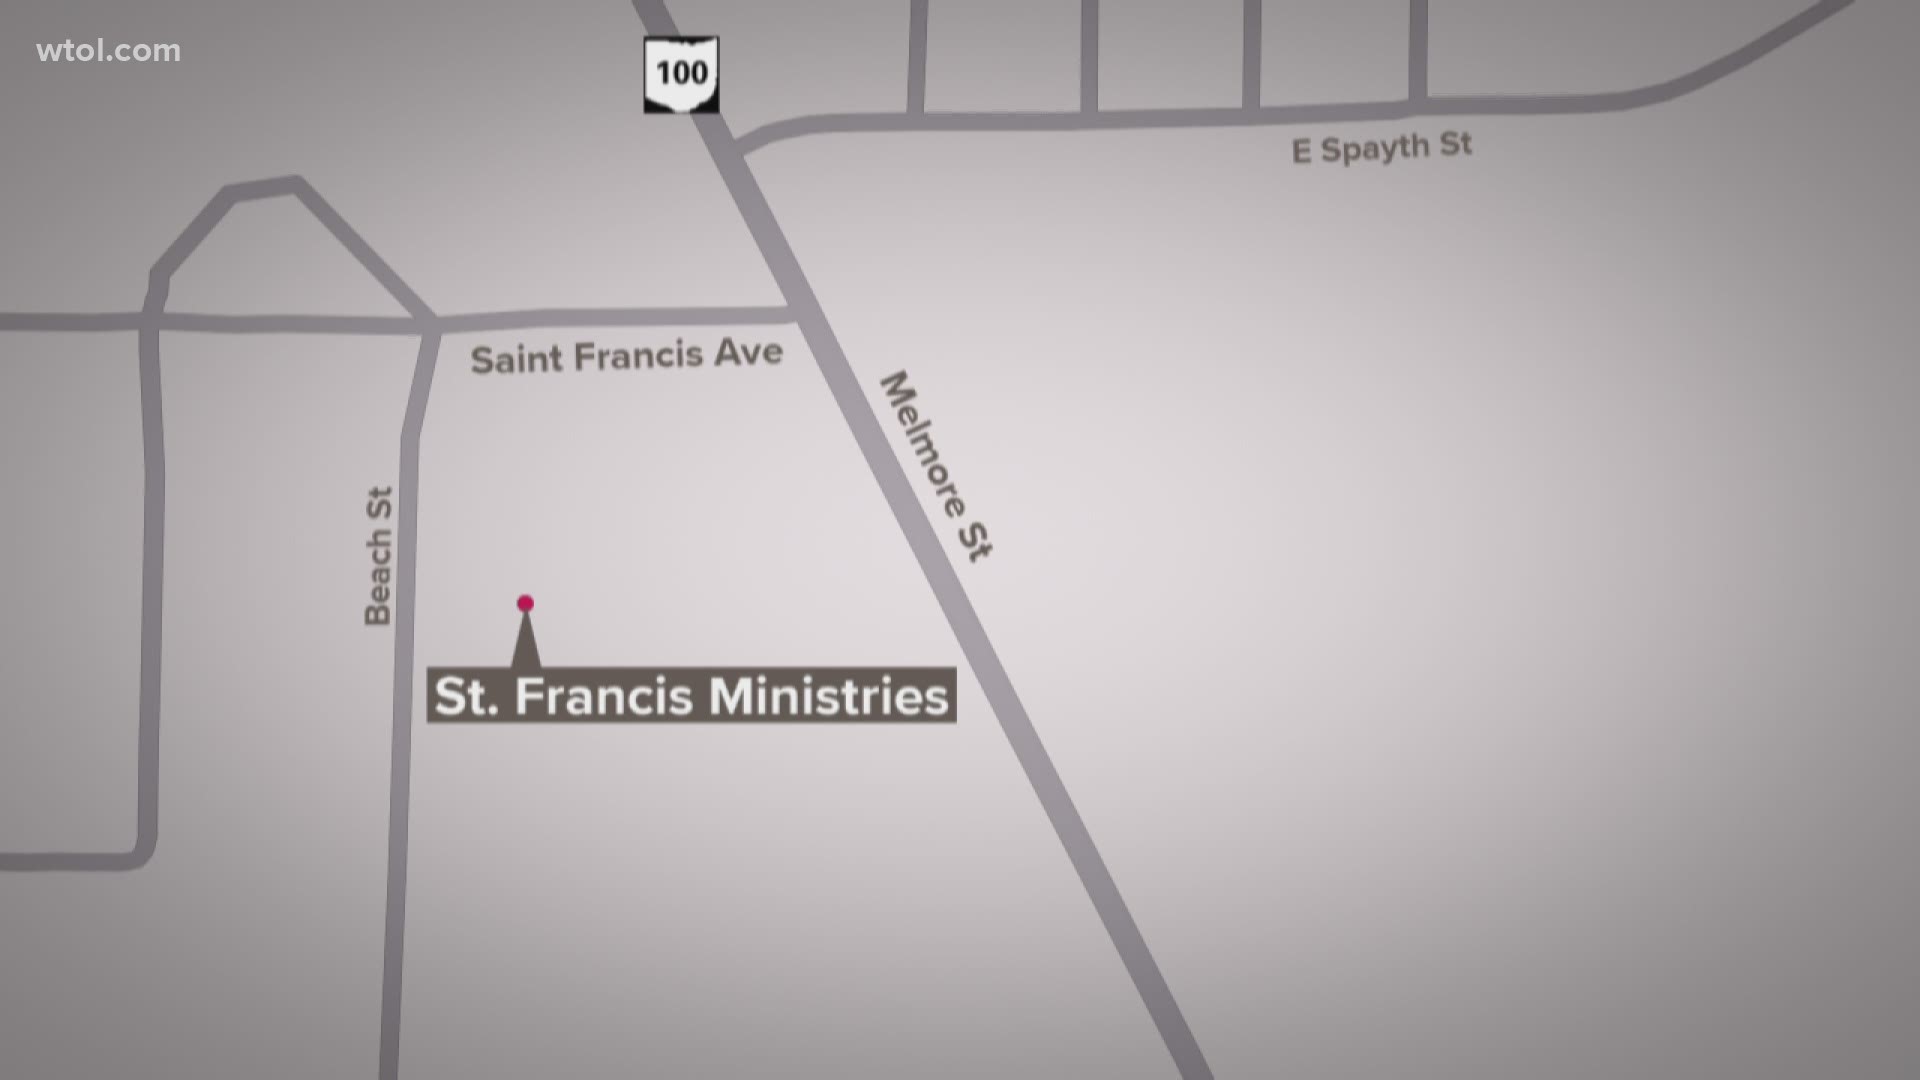 According to St. Francis Senior Ministries, on Monday, 12 staff members tested positive for COVID-19, with 26 residents testing positive on Tuesday.